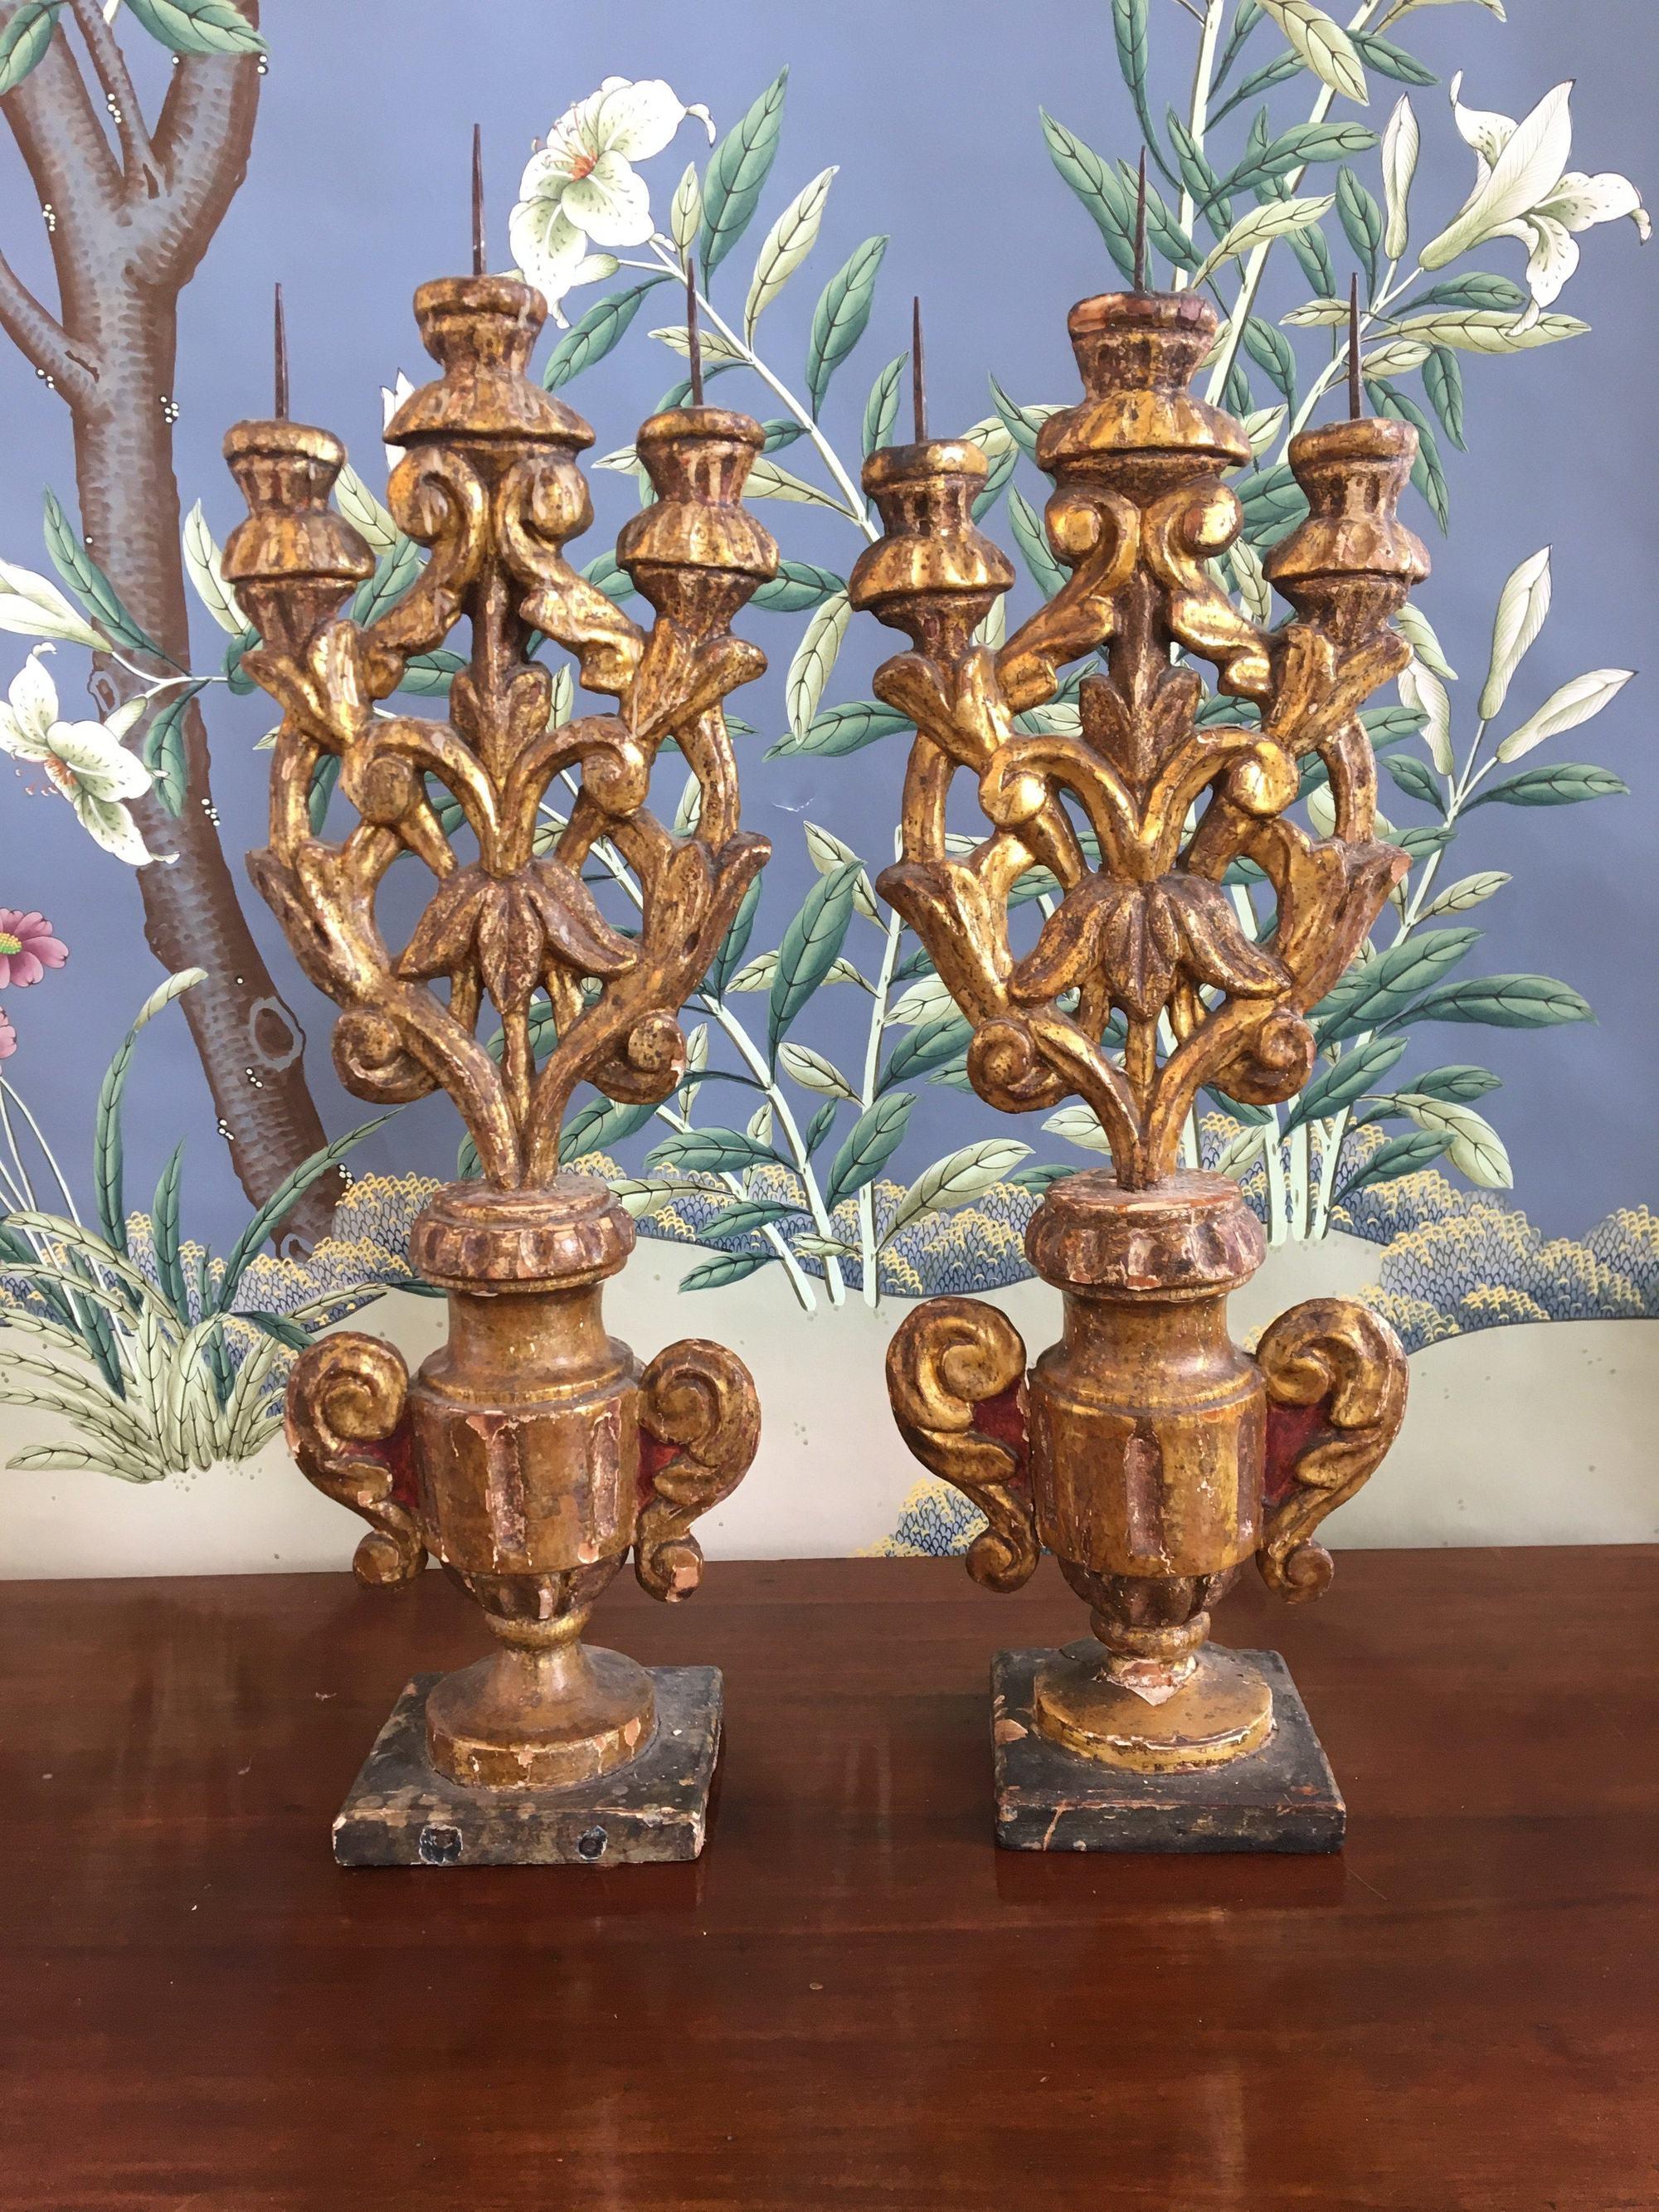 Pair of early carved and gilt wooden pricket candelabra, 18th century, likely Italian.